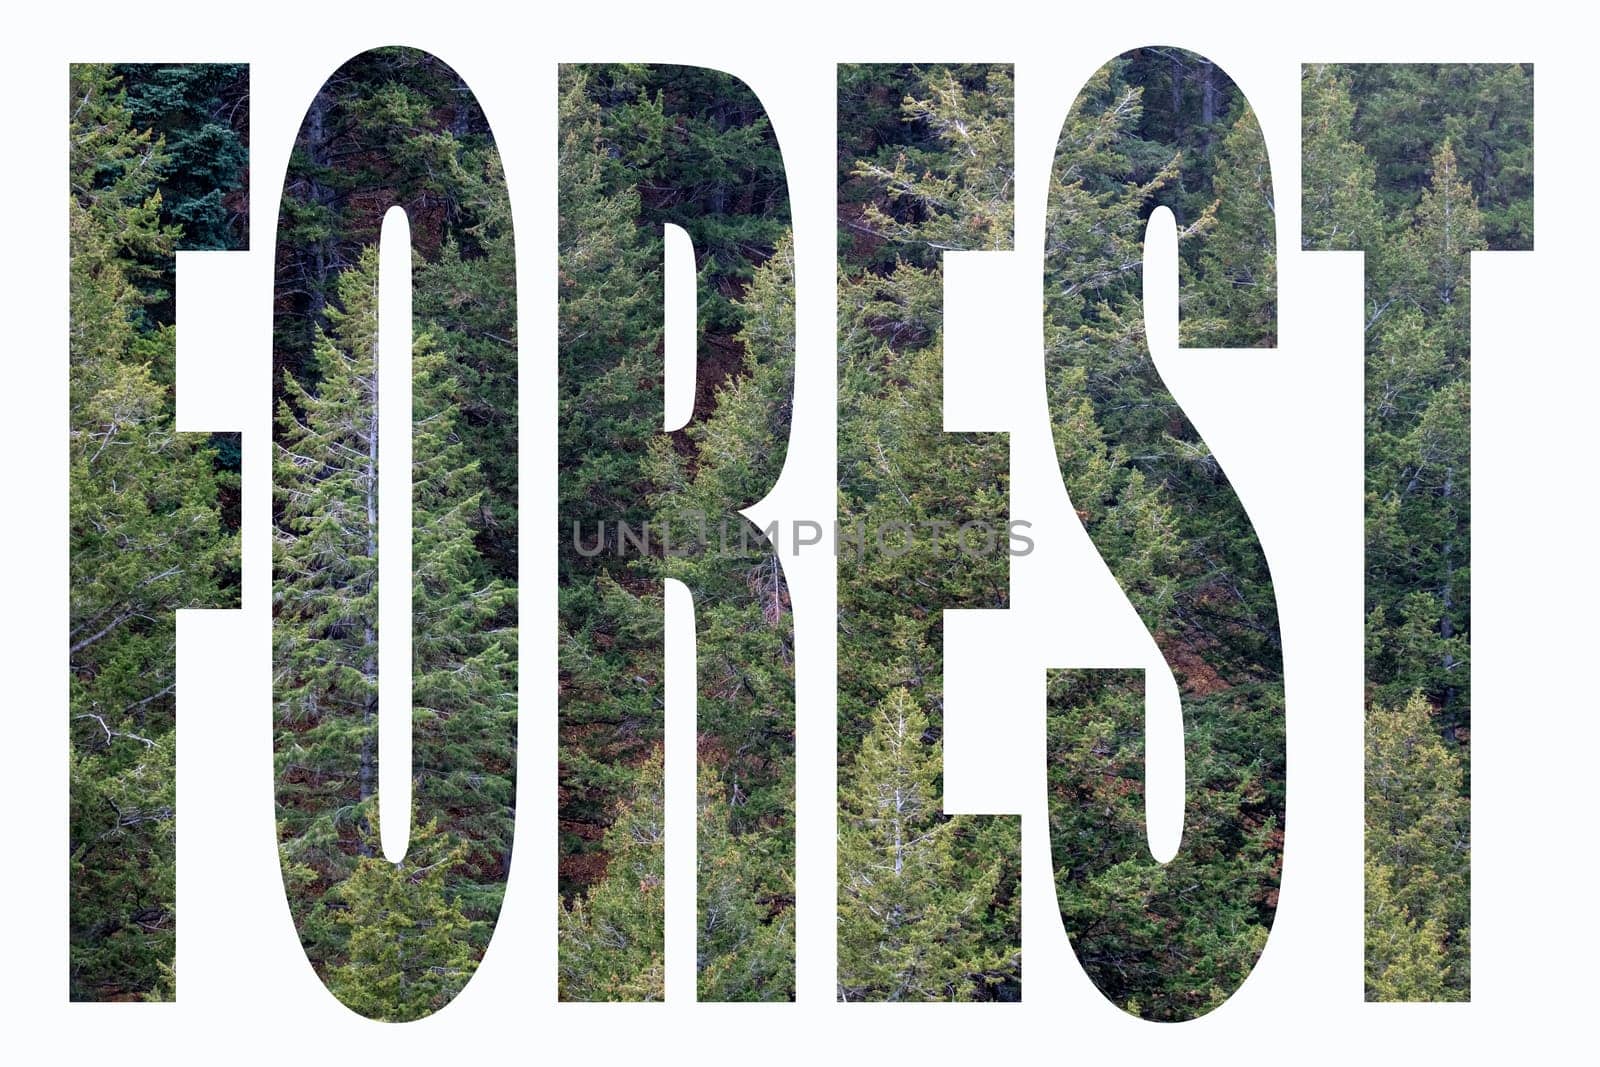 Word FOREST in white mask with image of pine tree forest viewed in text cut out. Mountain pine forest scene viewed through text box Forest. High quality photo